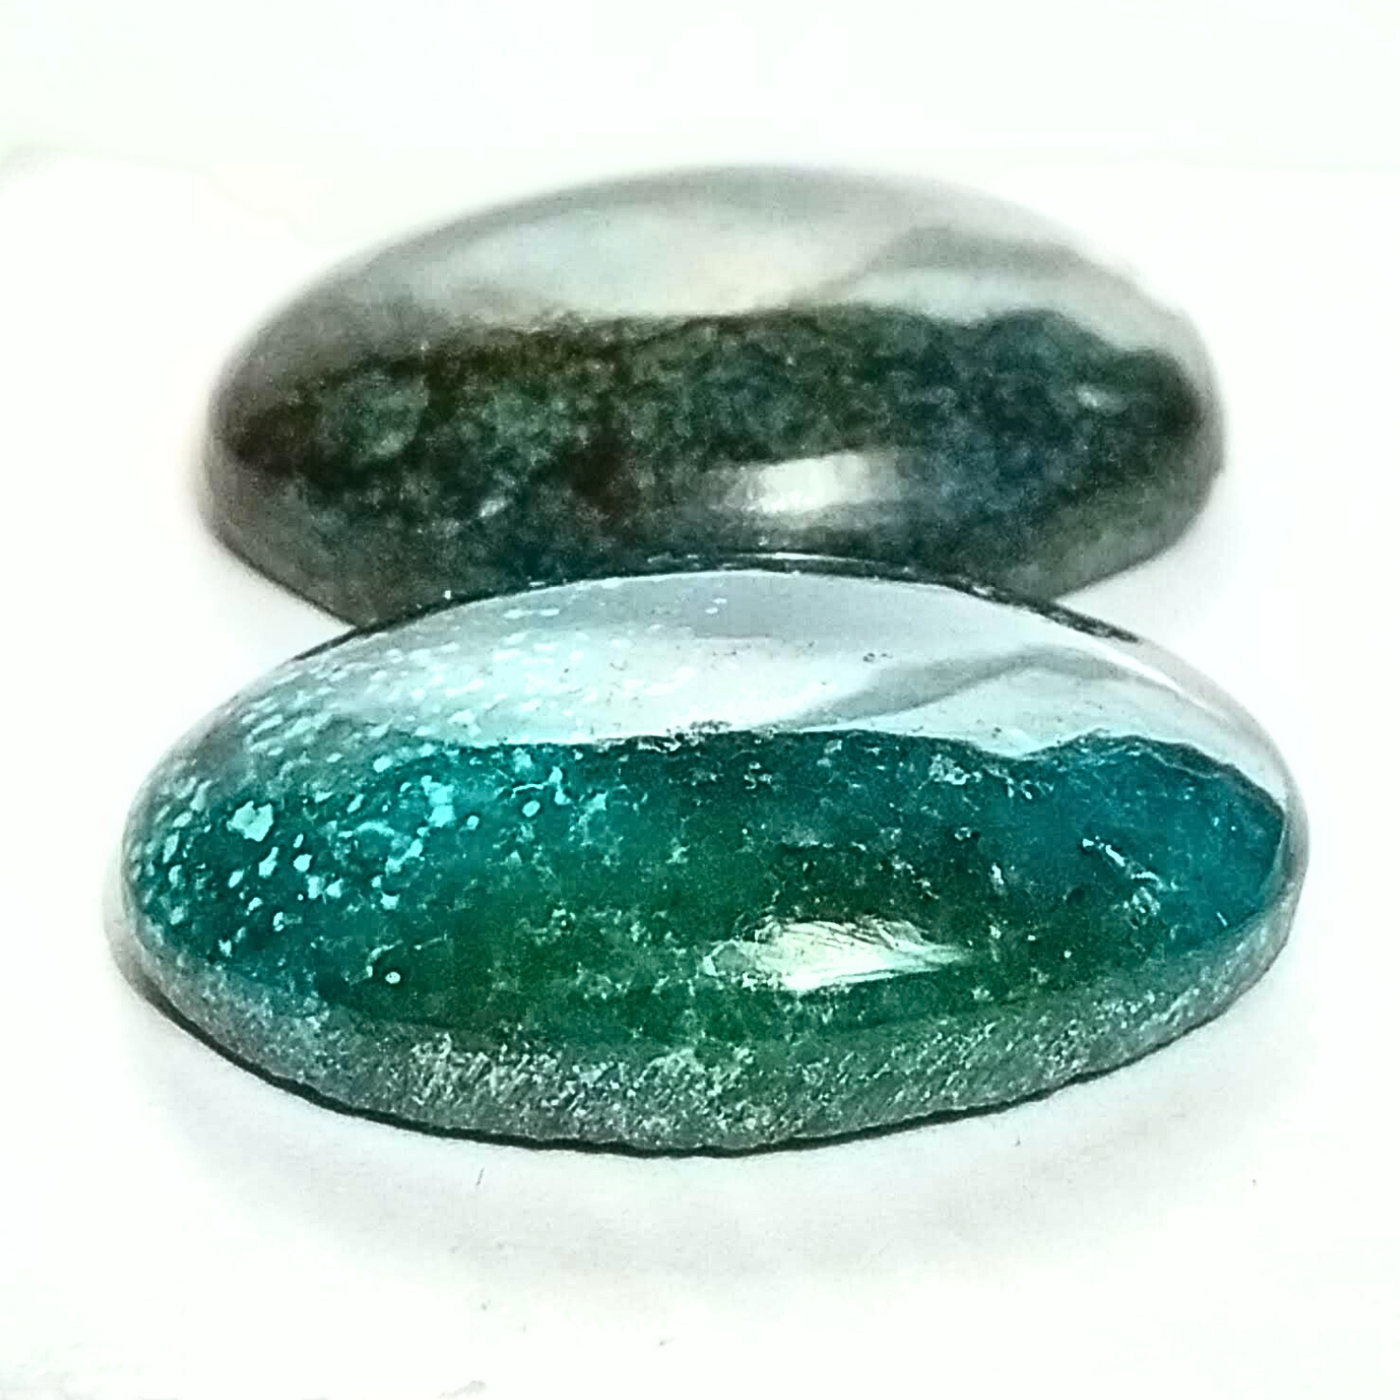 CTQ-1000 Chinese Turquoise Cabochon Pair